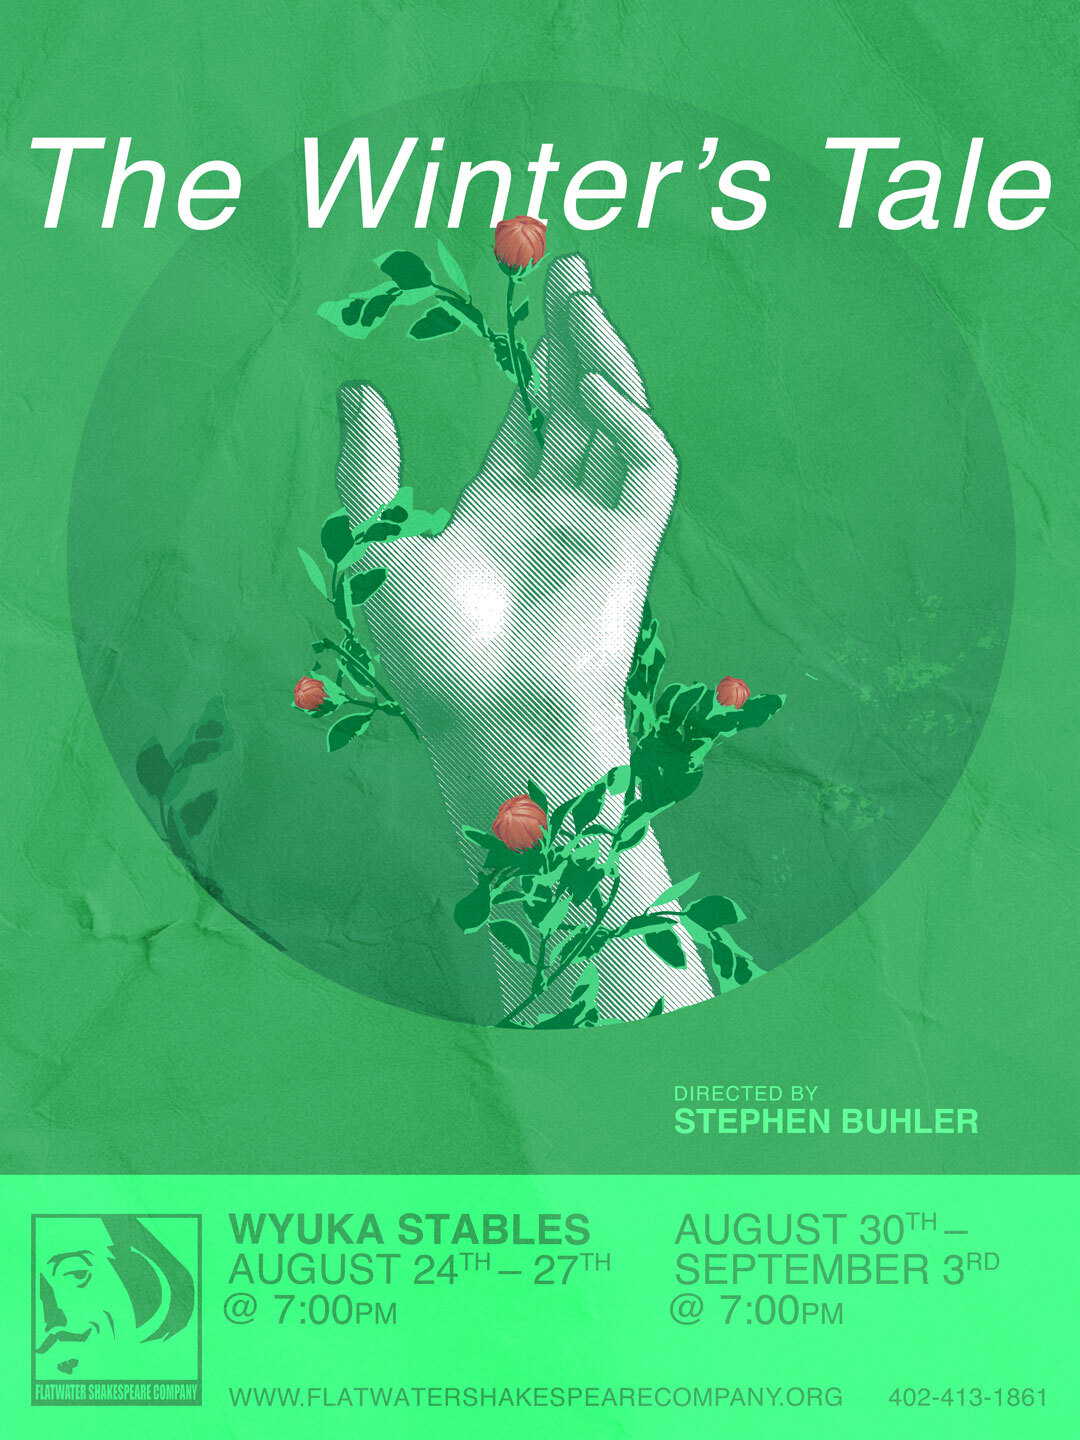 9/1 STU - STUDENT: Friday. September 1, 2023 | 7:00 p.m. - 10:00 p.m. CST | Wyuka Stables (The Winter's Tale)